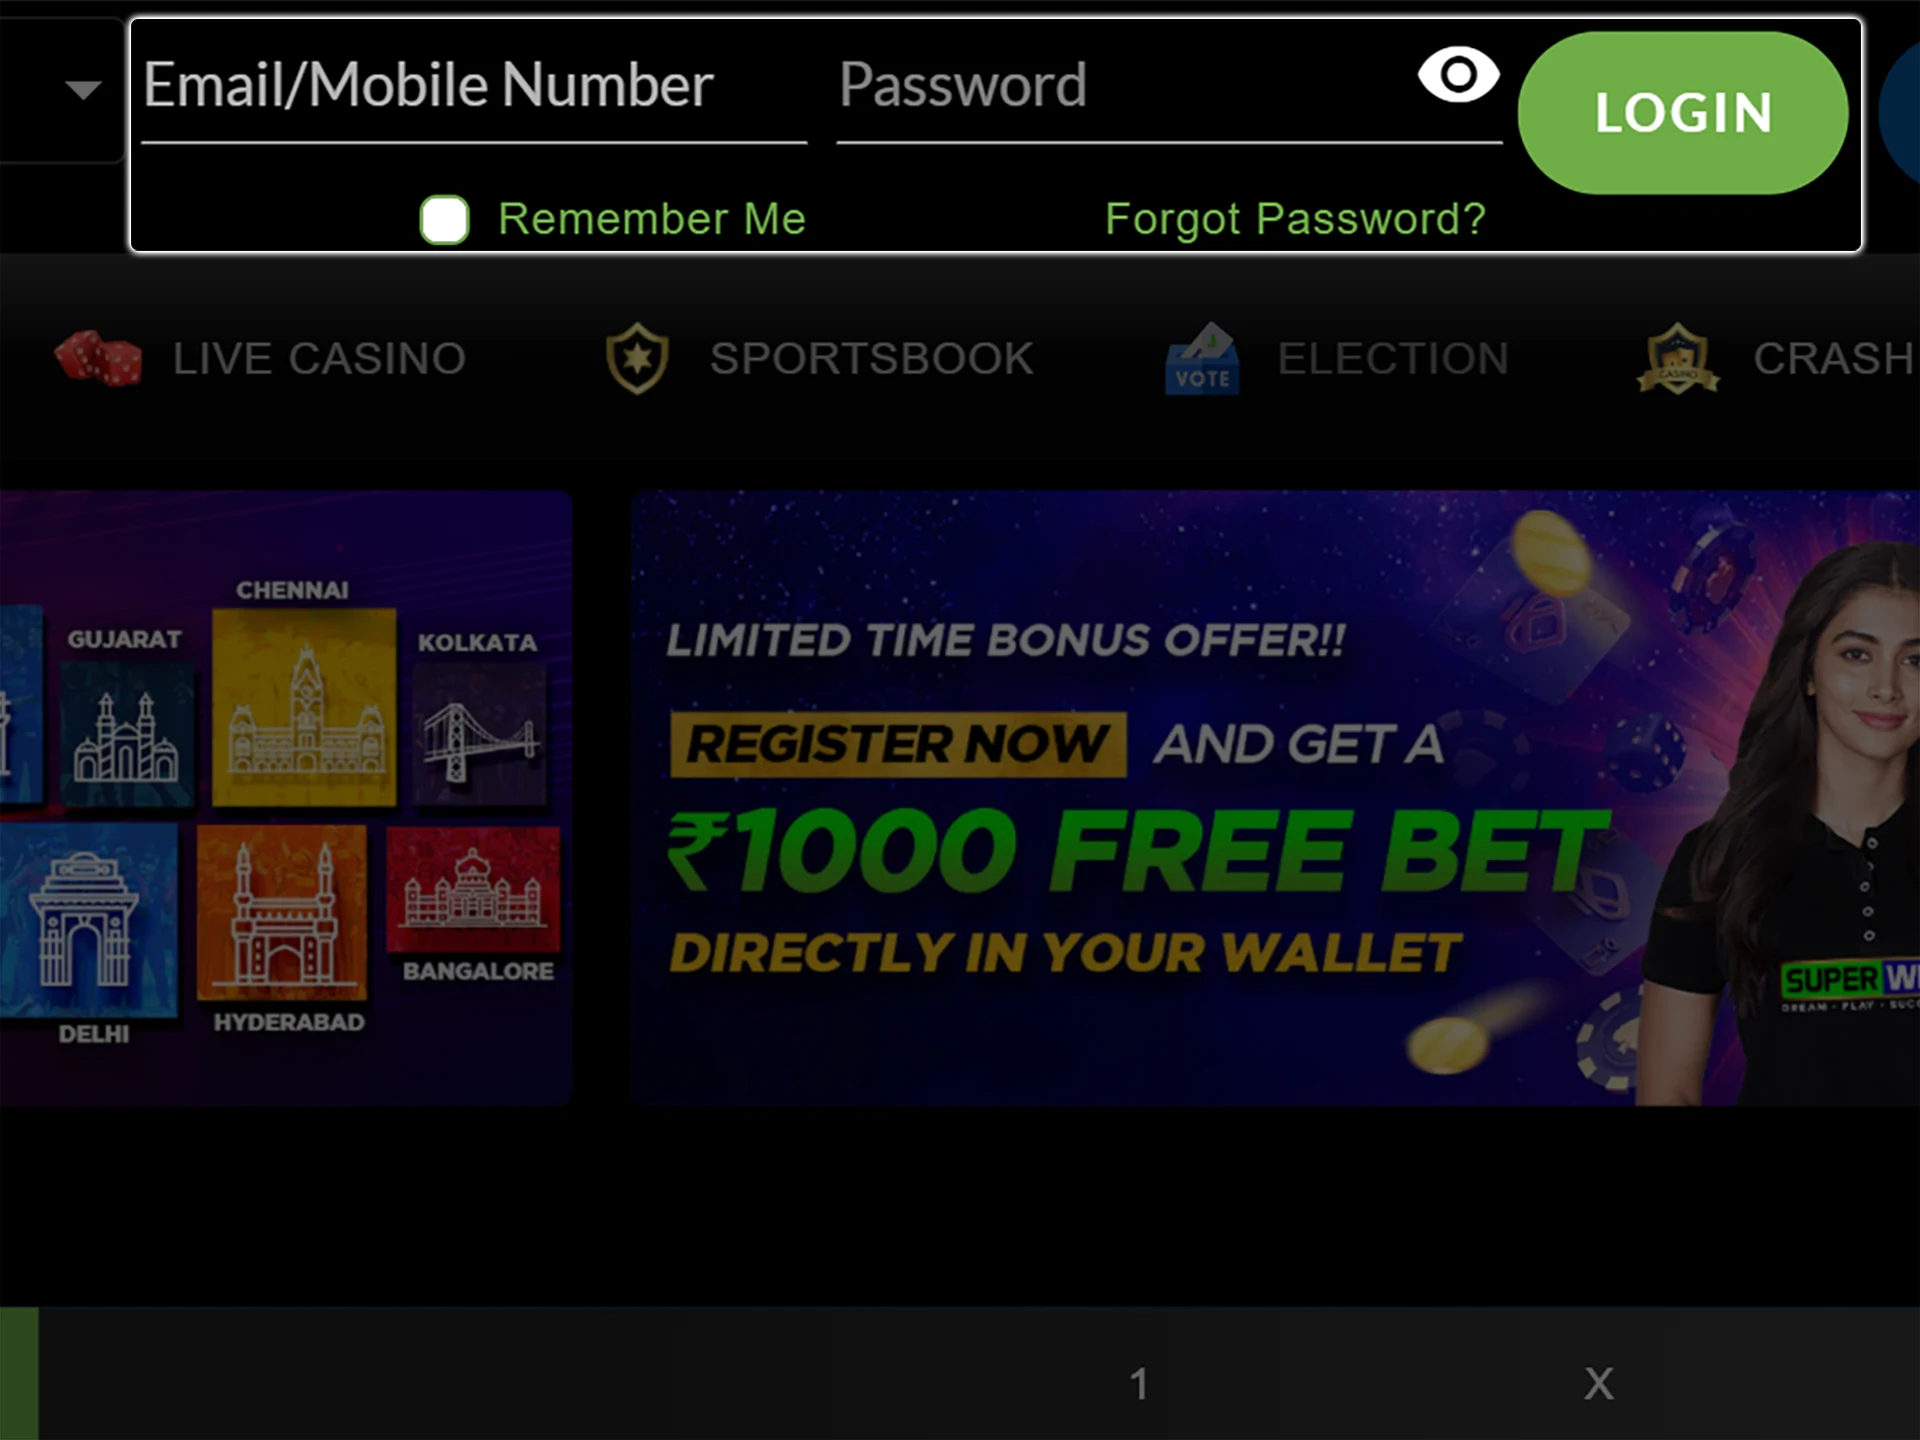 Enter your phone number and password to log into your SuperWin account.